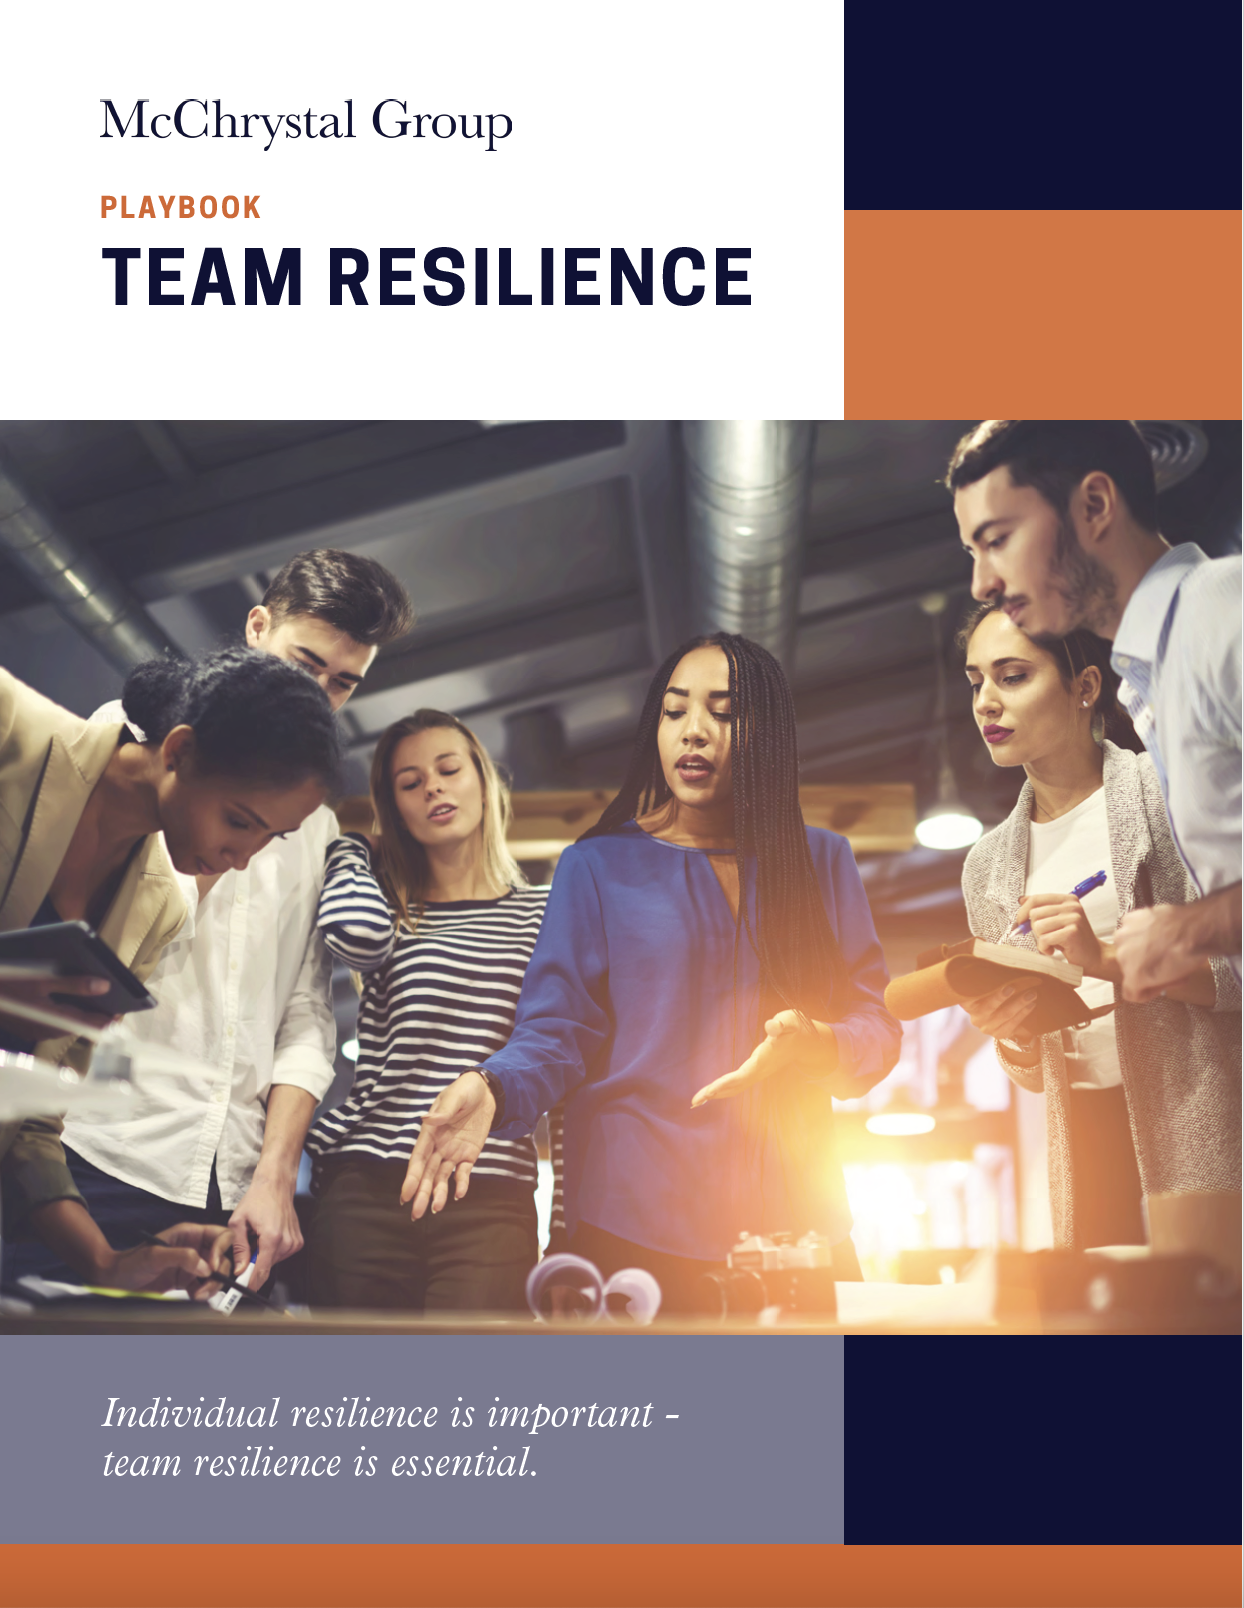 Playbook for organizational resilience